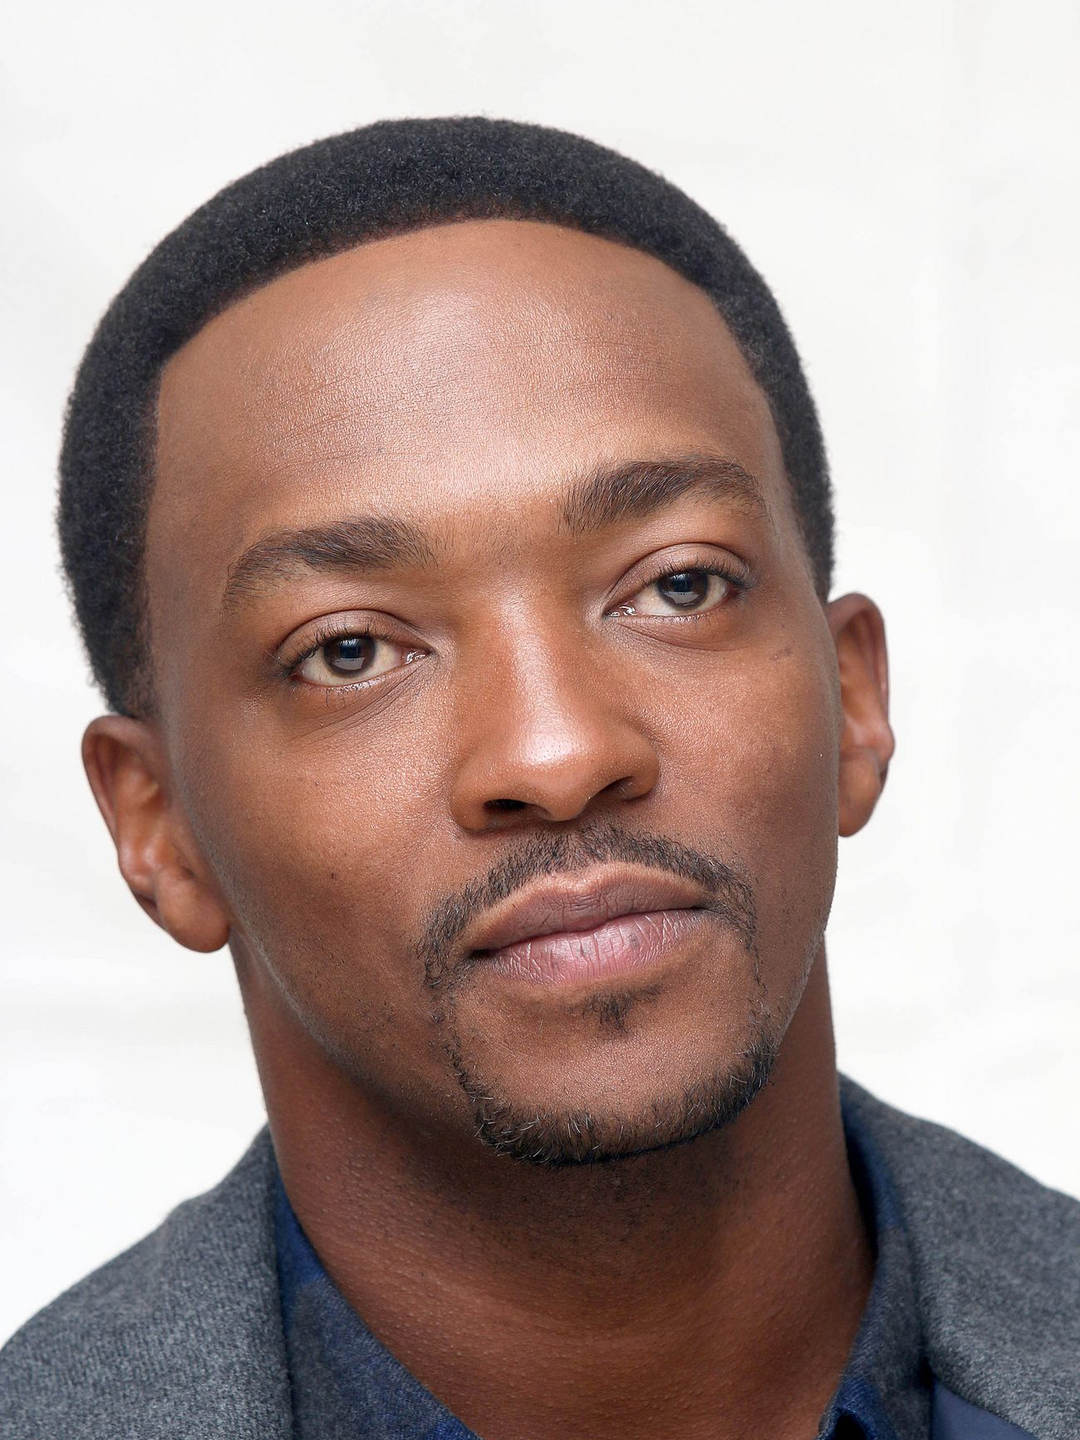 Anthony Mackie young pics